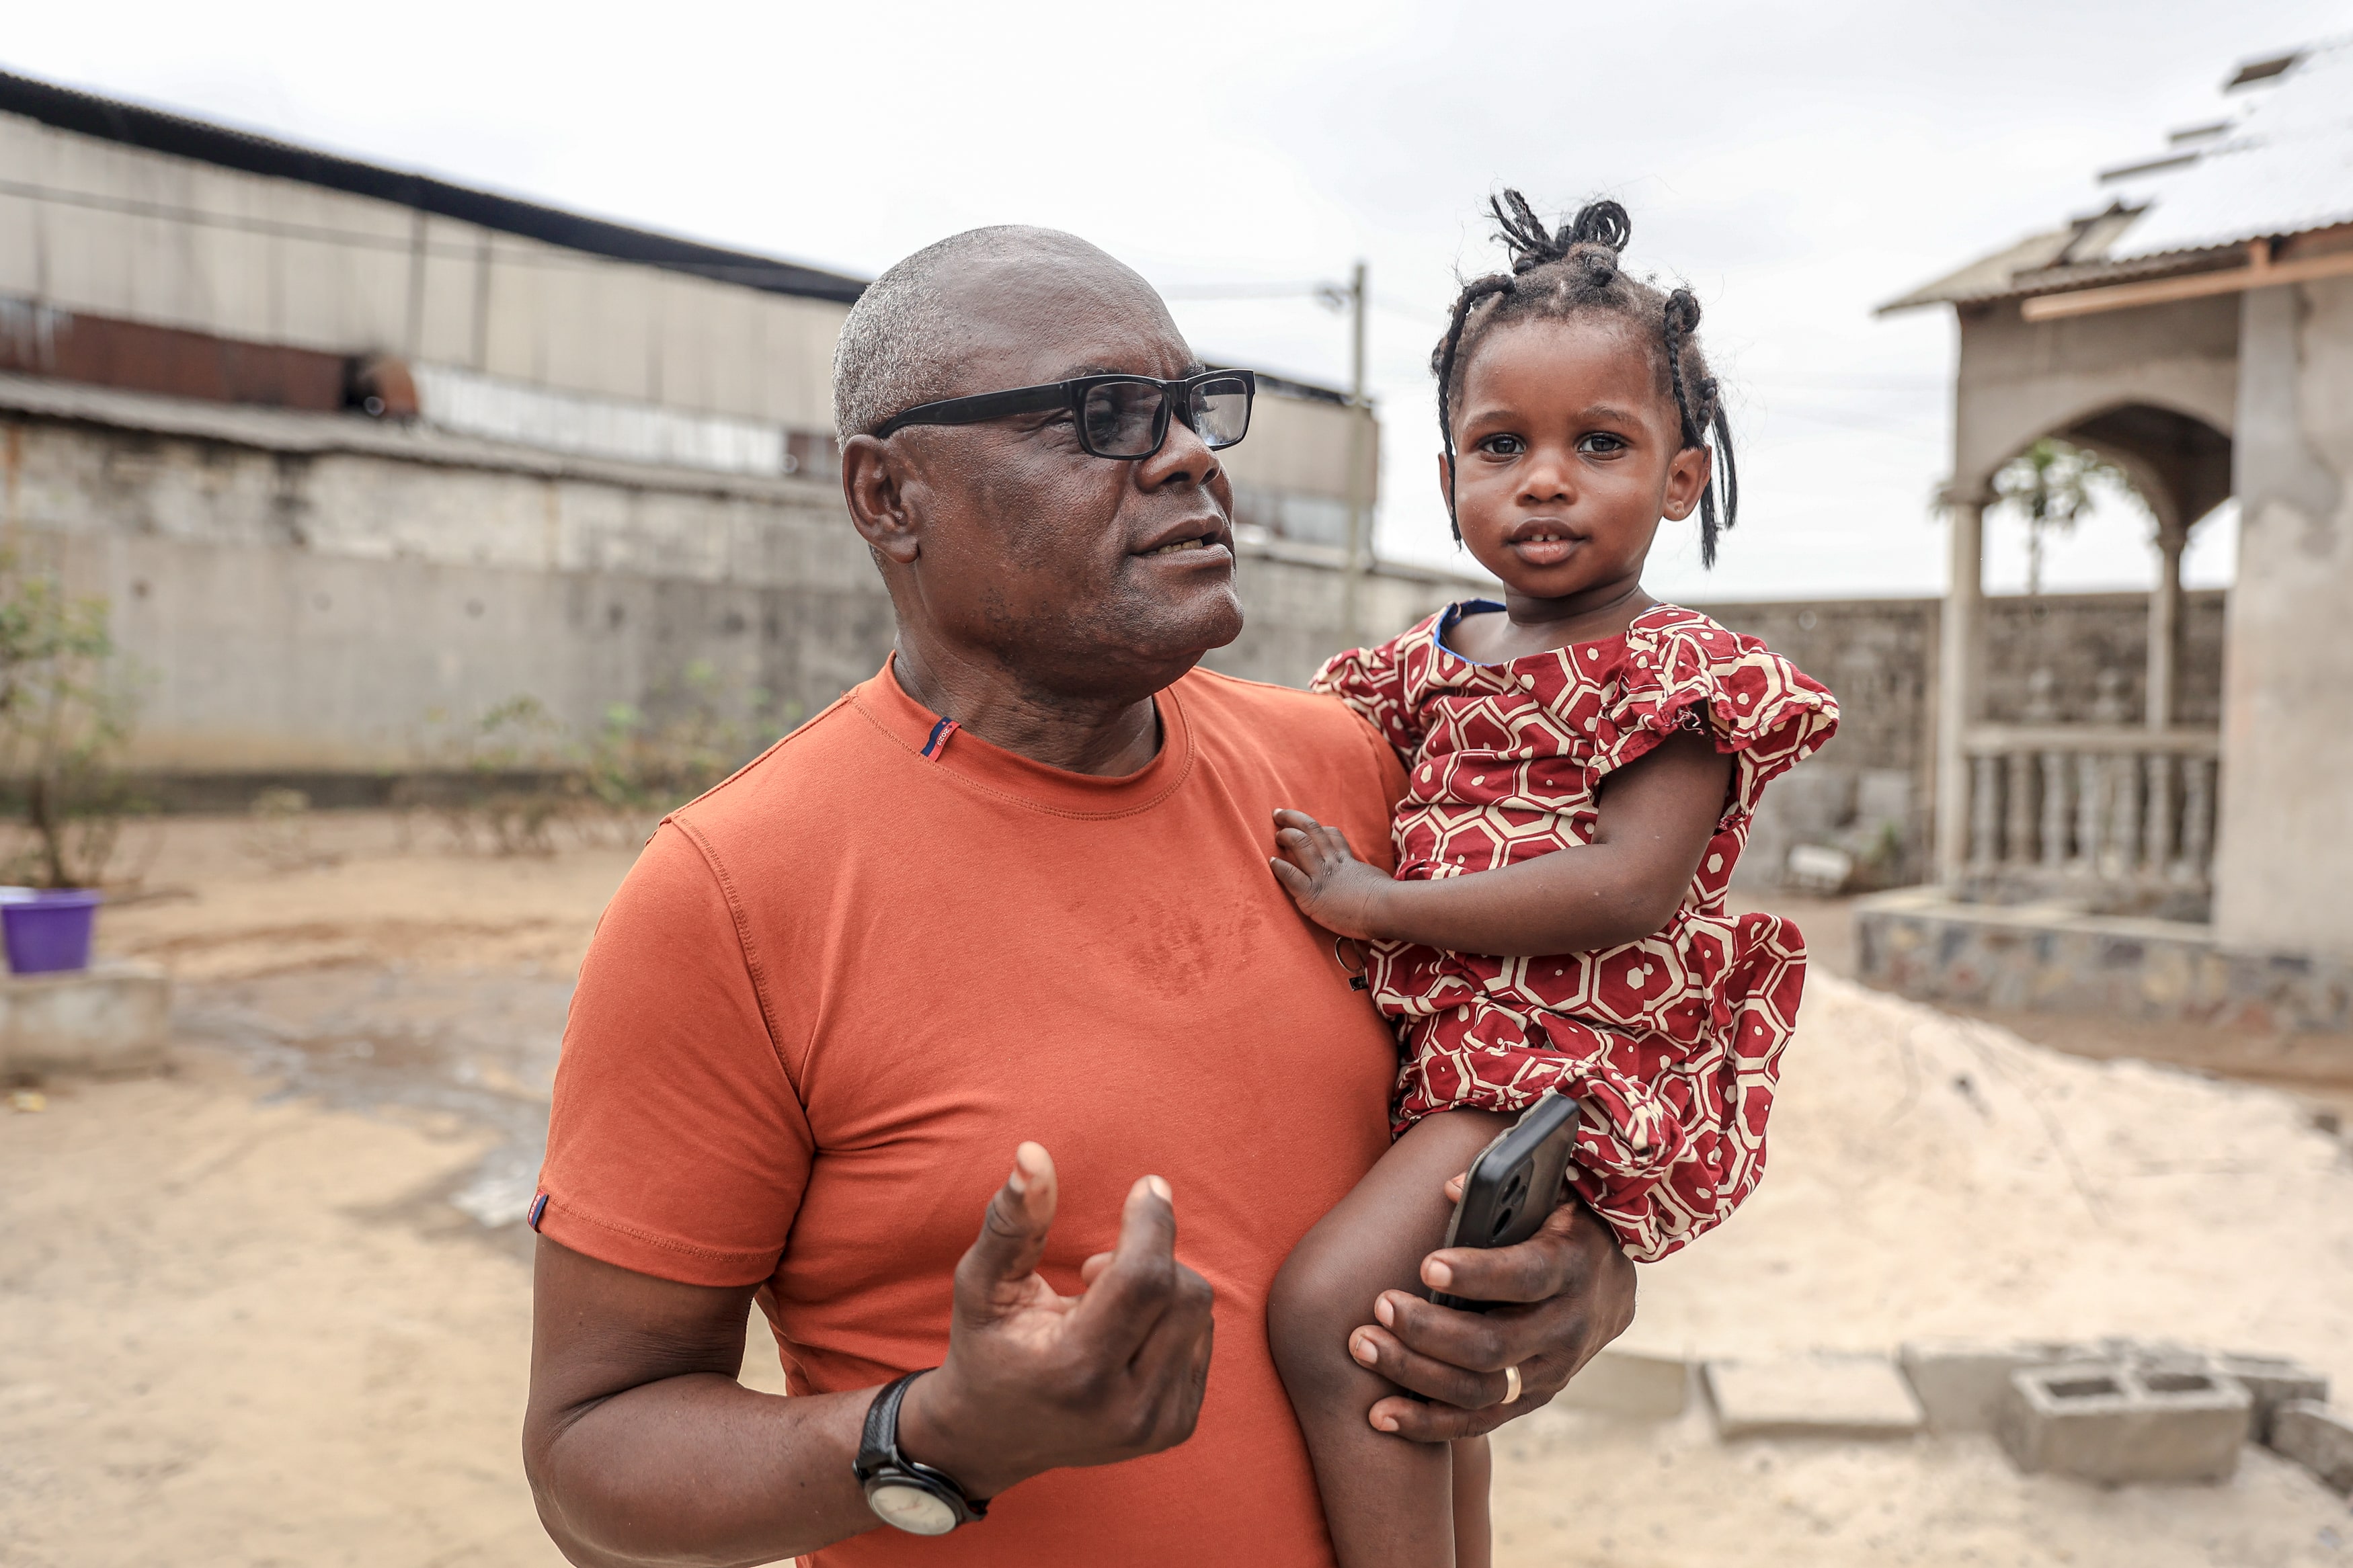 A Black man in an orange tee shirt and black glasses holds a little girl with braids and a red dress in his arms.